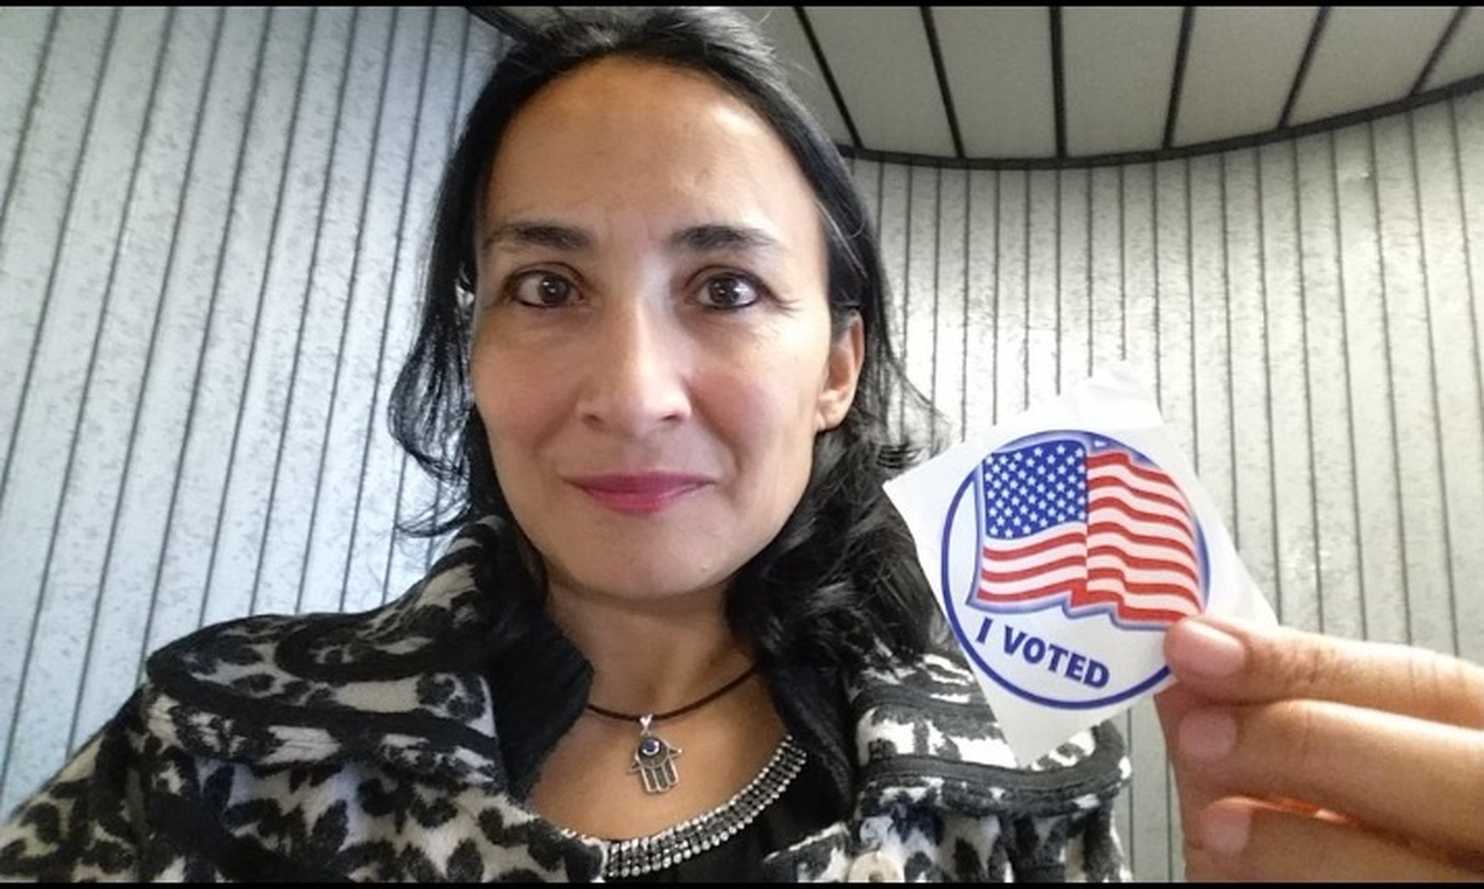  Muslim woman who voted for Trump asks Georgetown to intervene over professor’s ‘hateful, vulgar’ messages 